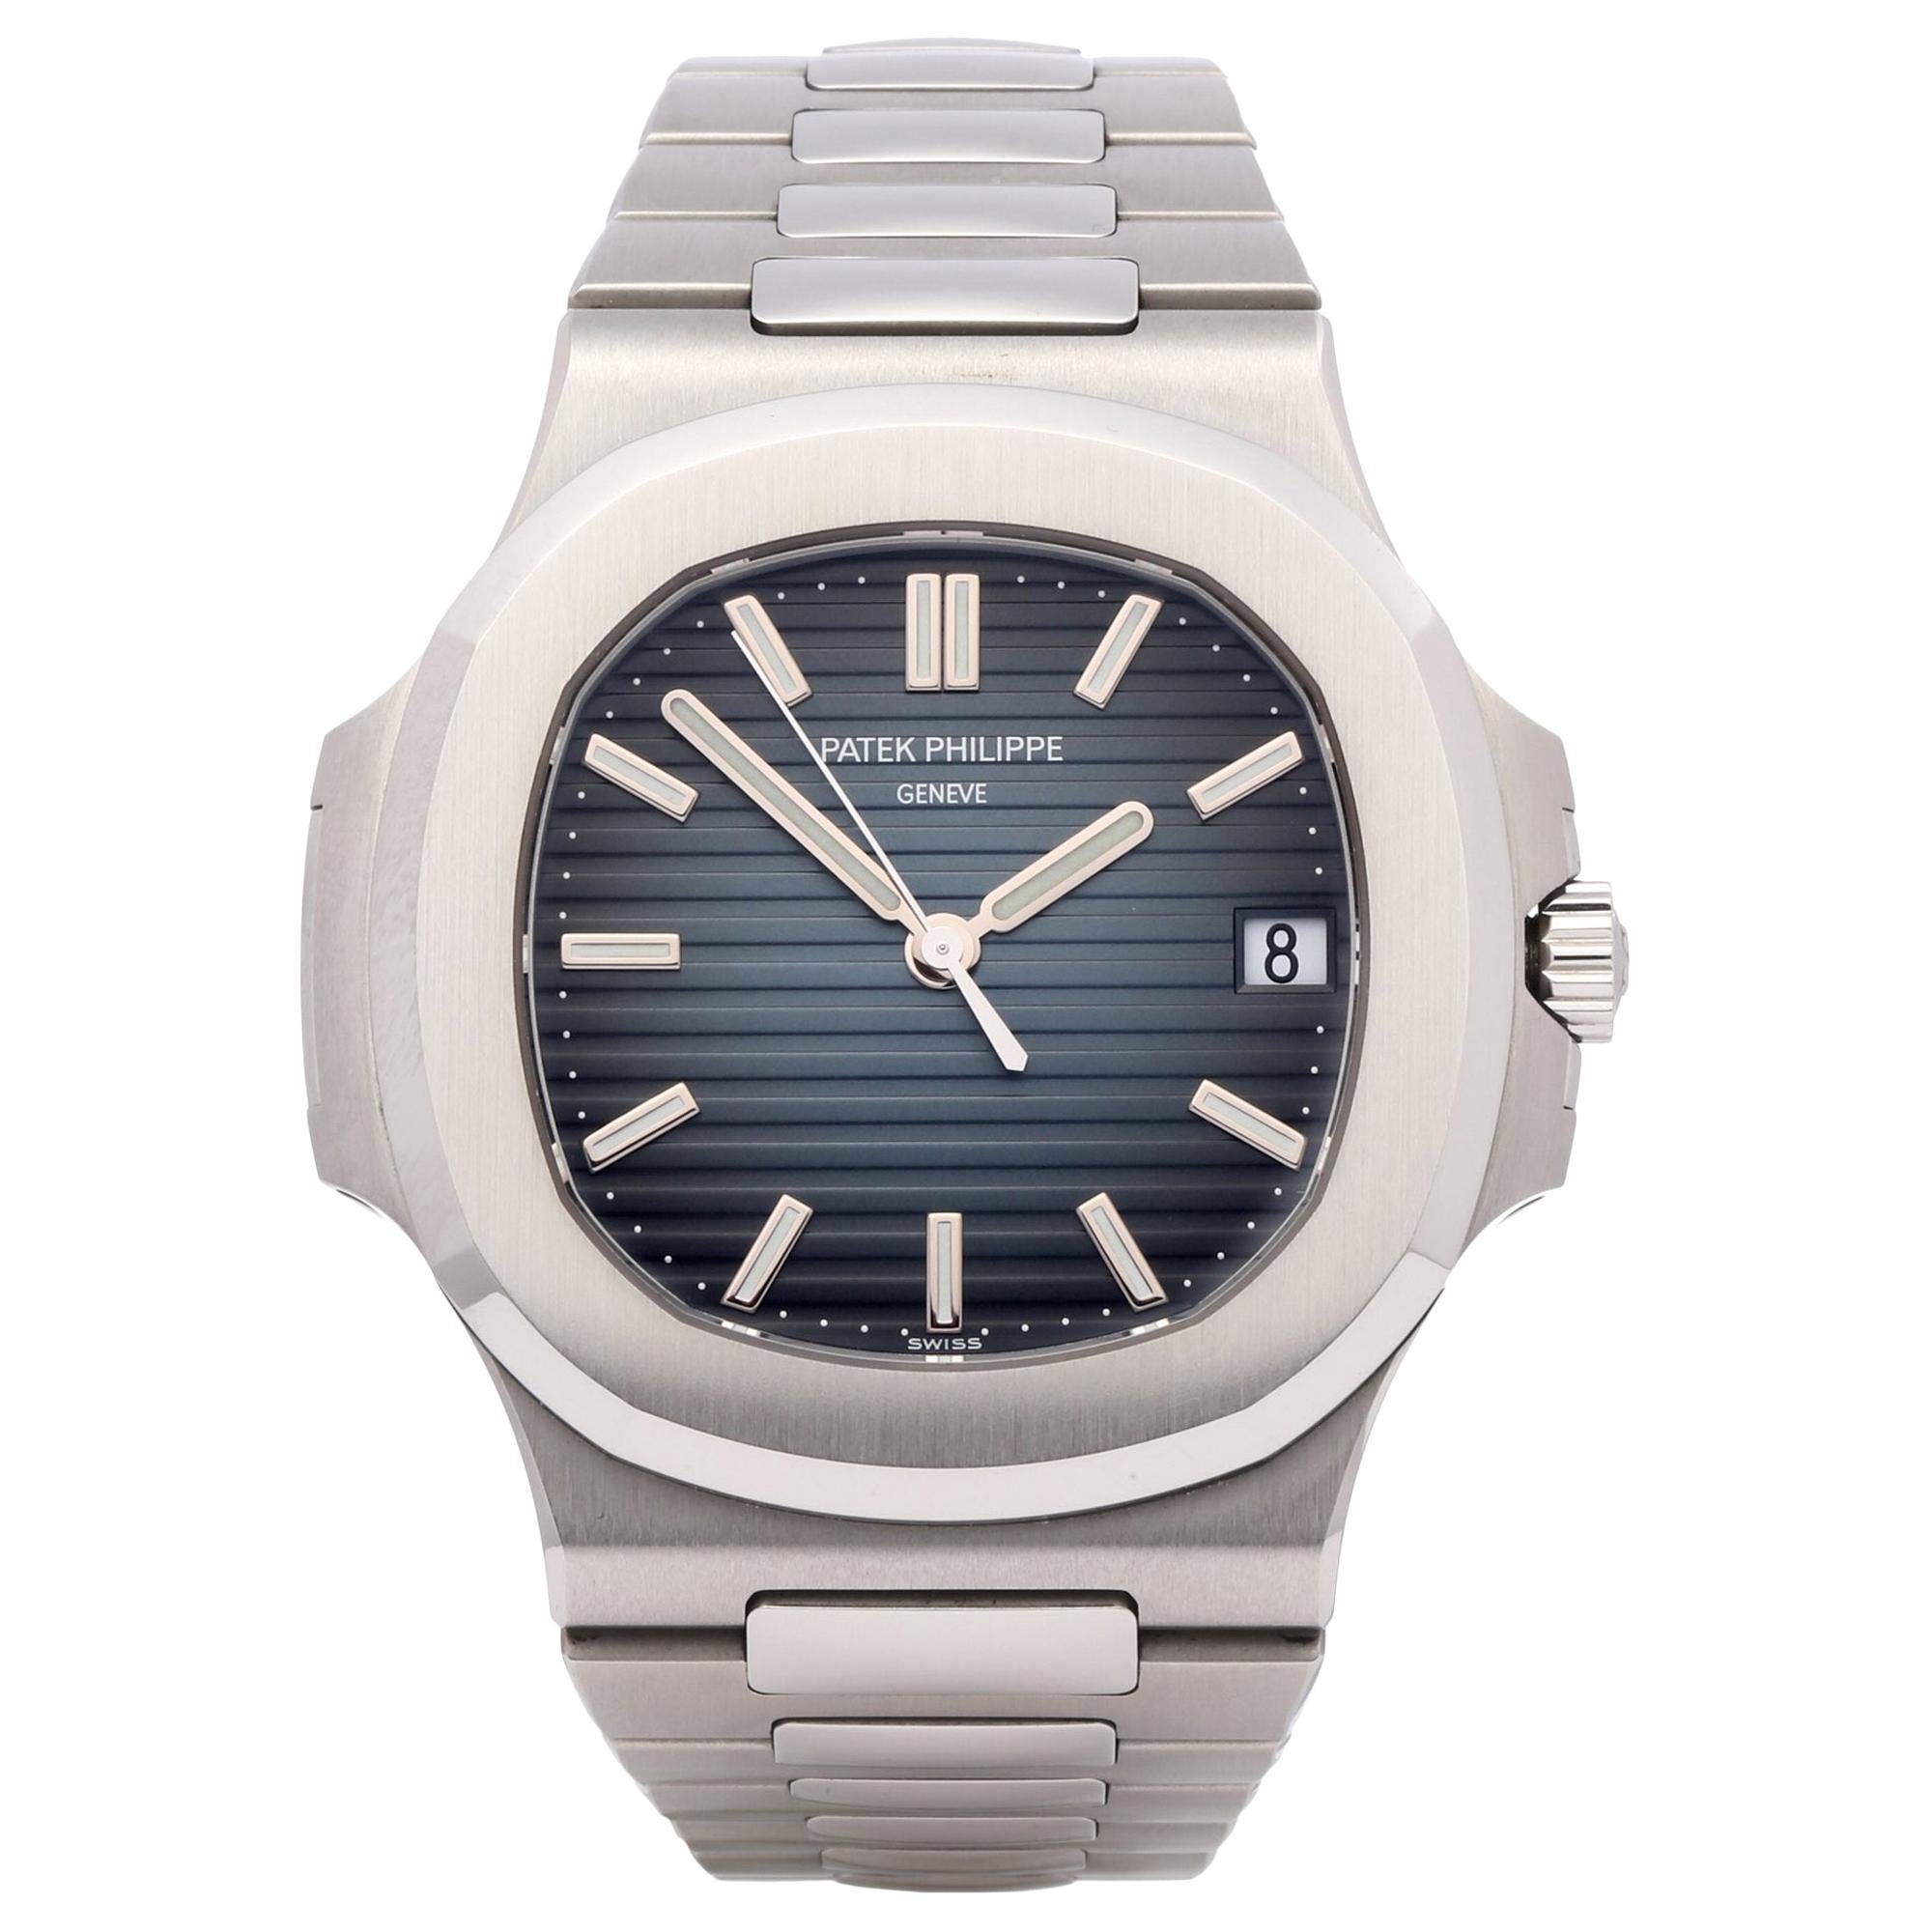 Patek Philippe Nautilus 5711/1A-010 Men's Stainless Steel Unpolished Watch